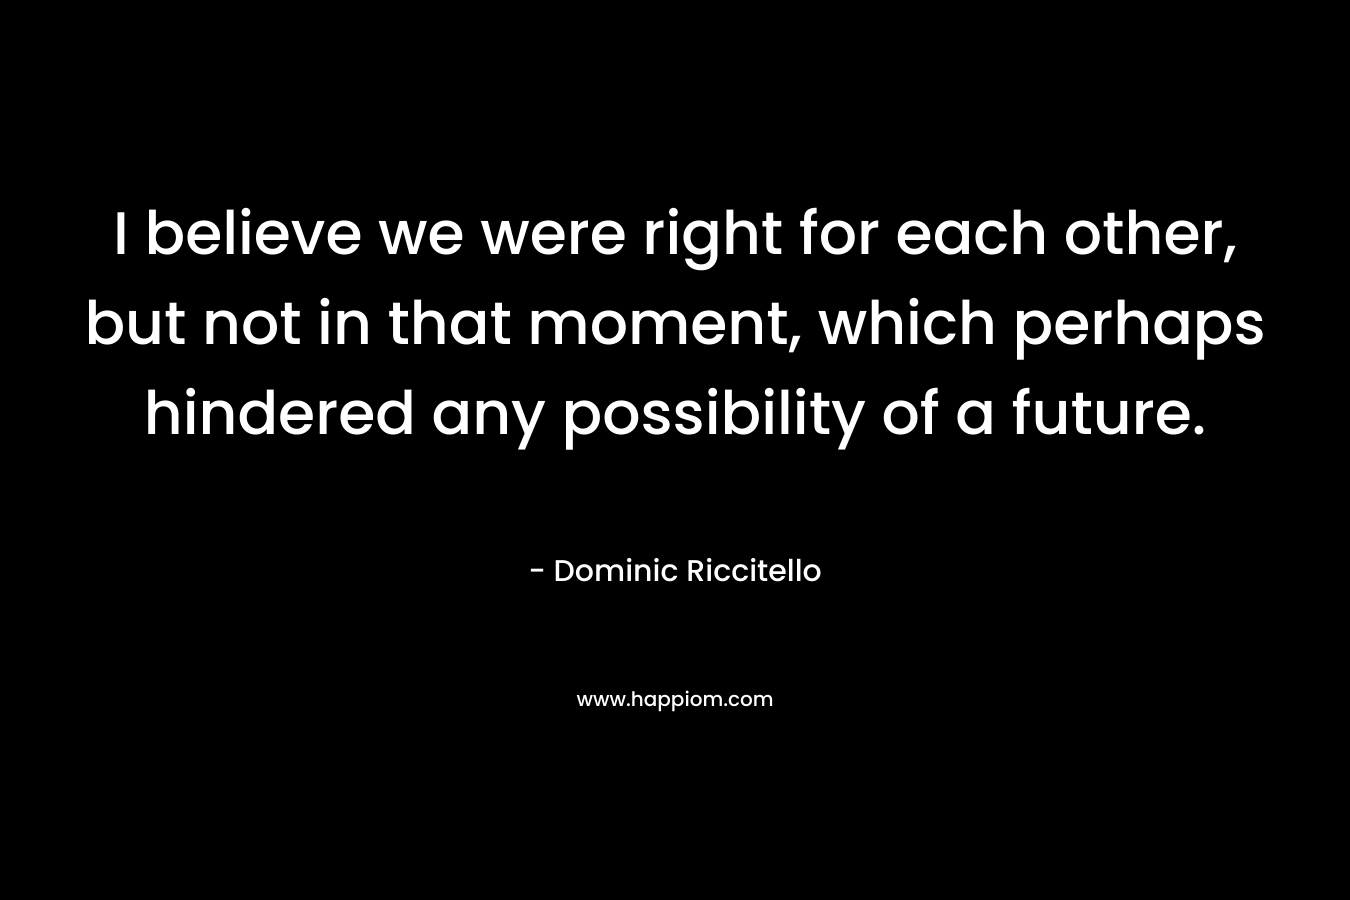 I believe we were right for each other, but not in that moment, which perhaps hindered any possibility of a future. – Dominic Riccitello